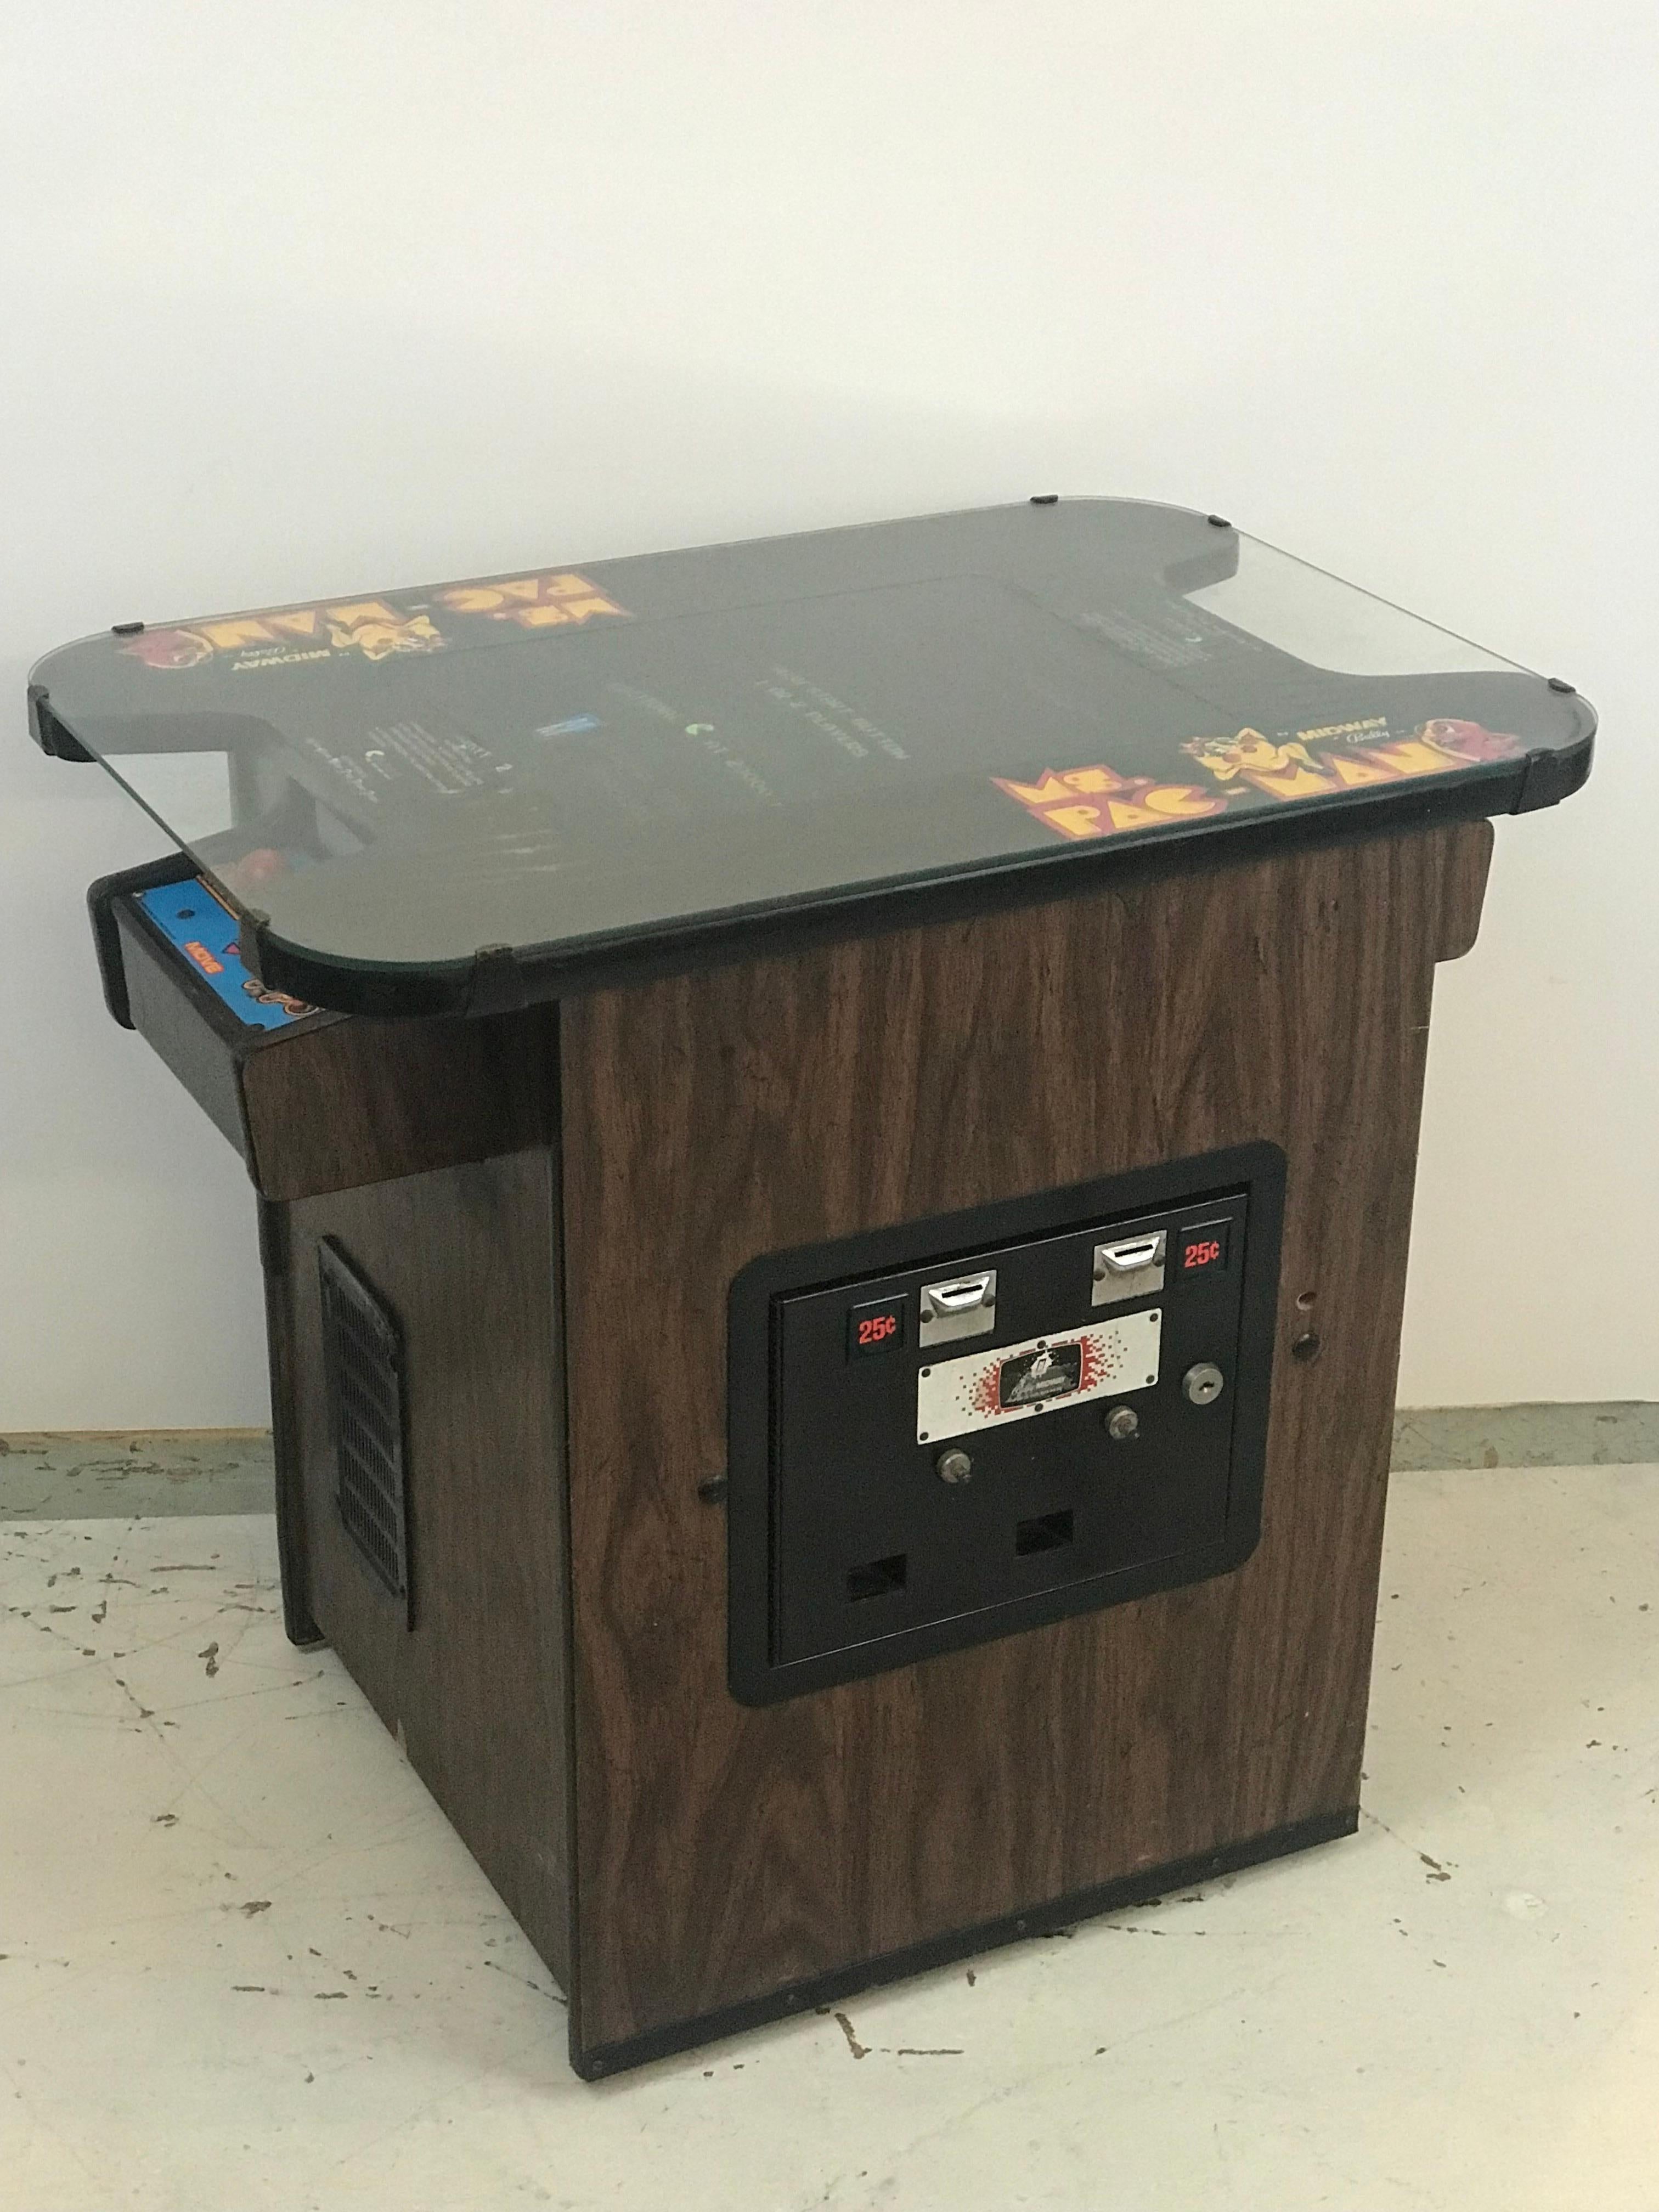 A vintage early issue Ms. Pac-Man cocktail table table game in excellent working order with highly popular aftermarket 